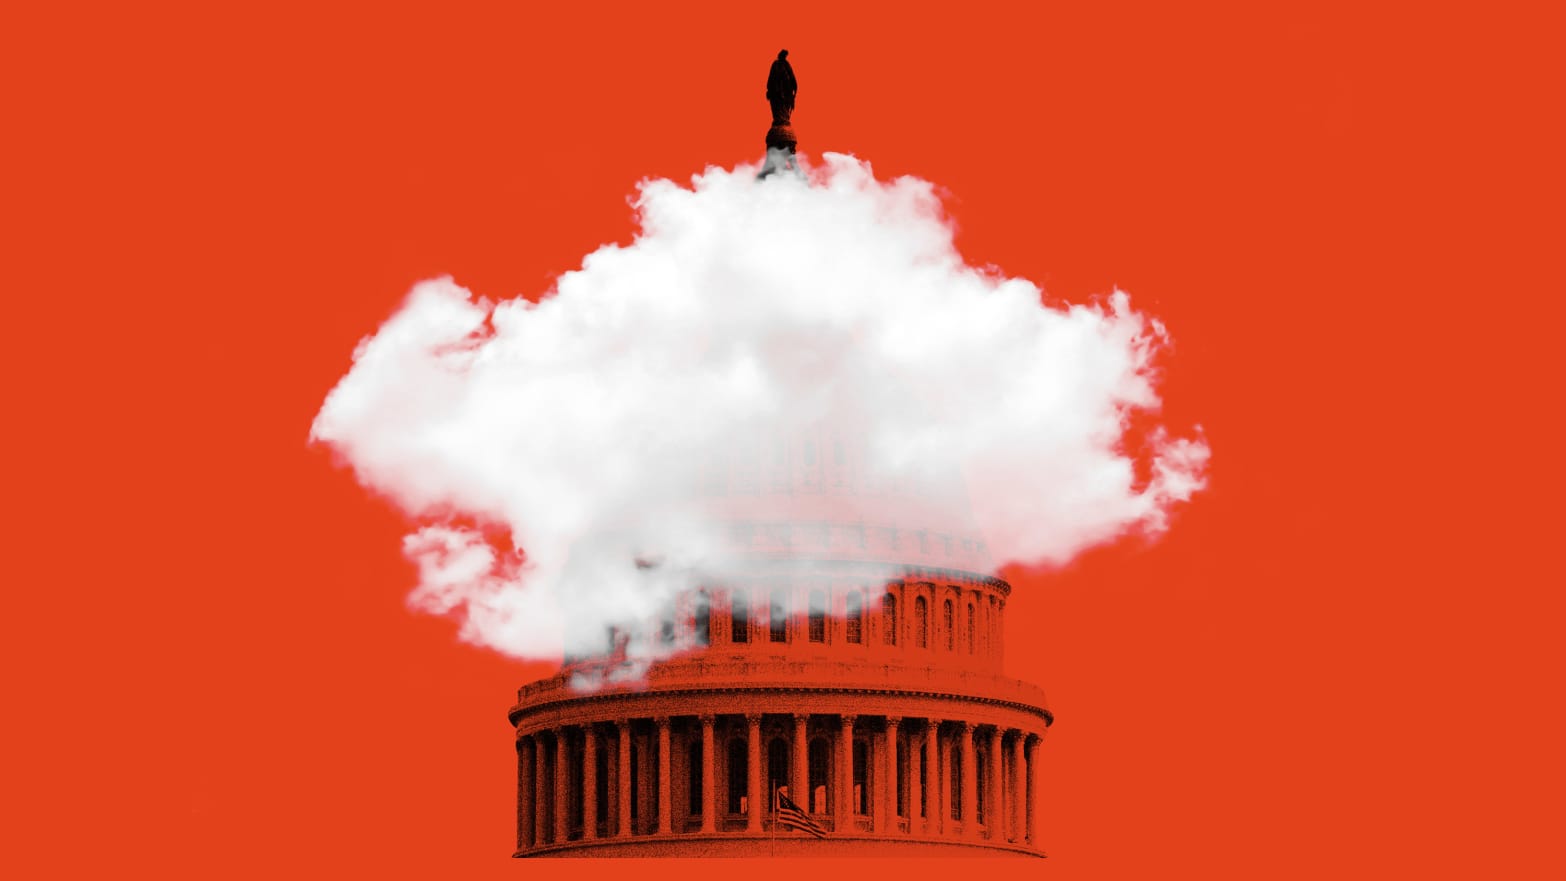 Photo illustration of the Capitol building on a red background with a thick cloud overlaid.